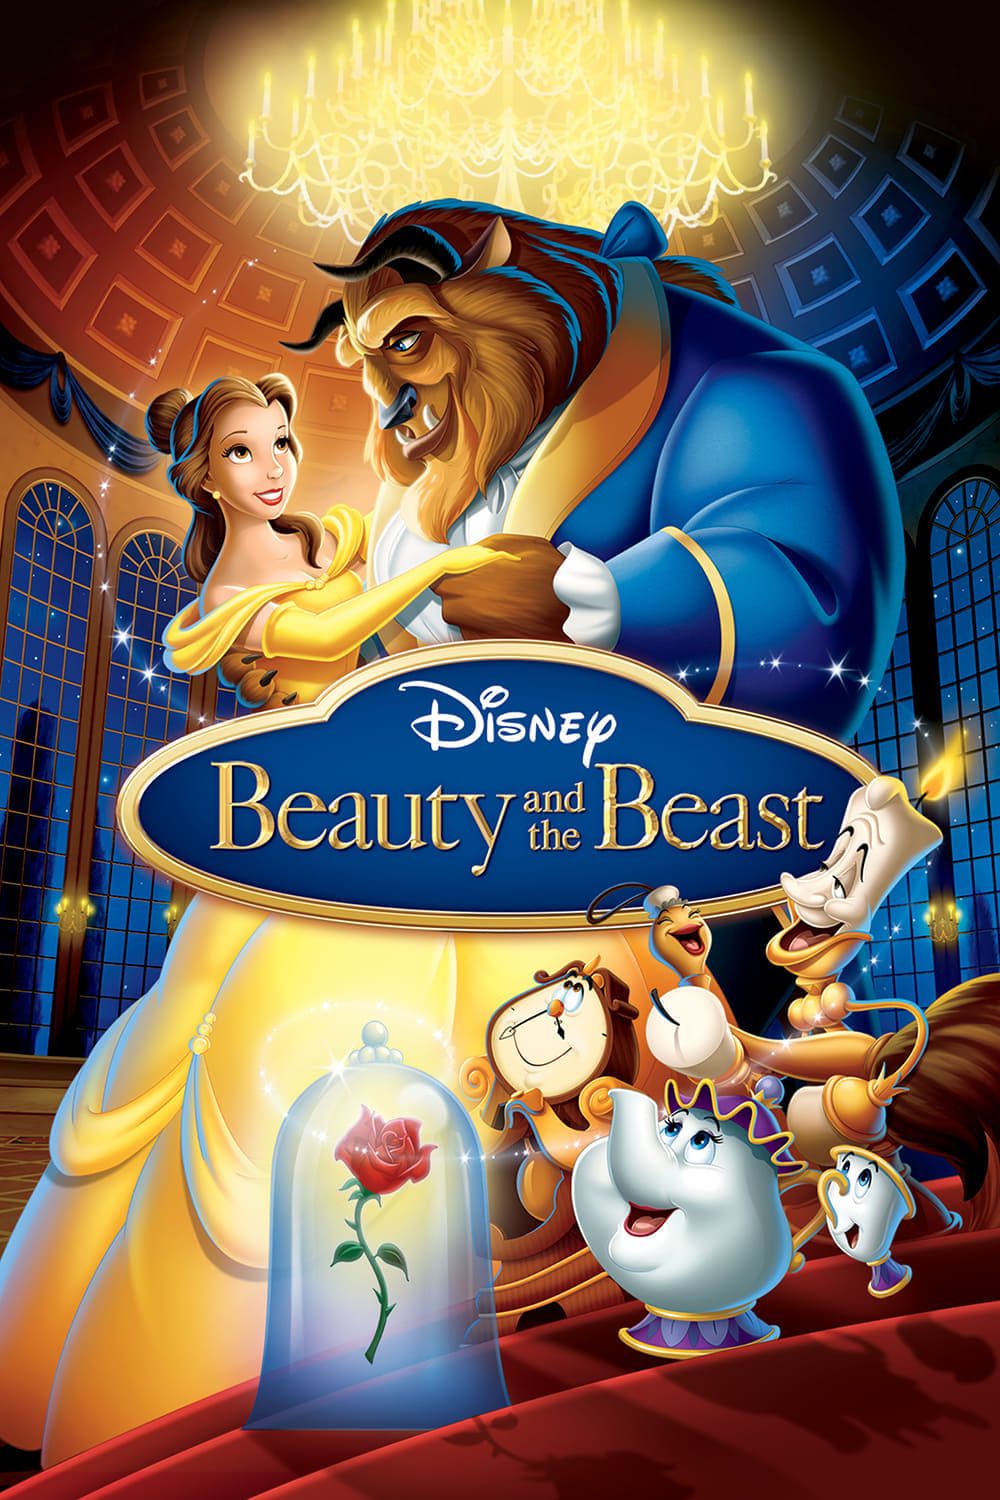 Beauty and the Beast, Disney movie poster from 1991